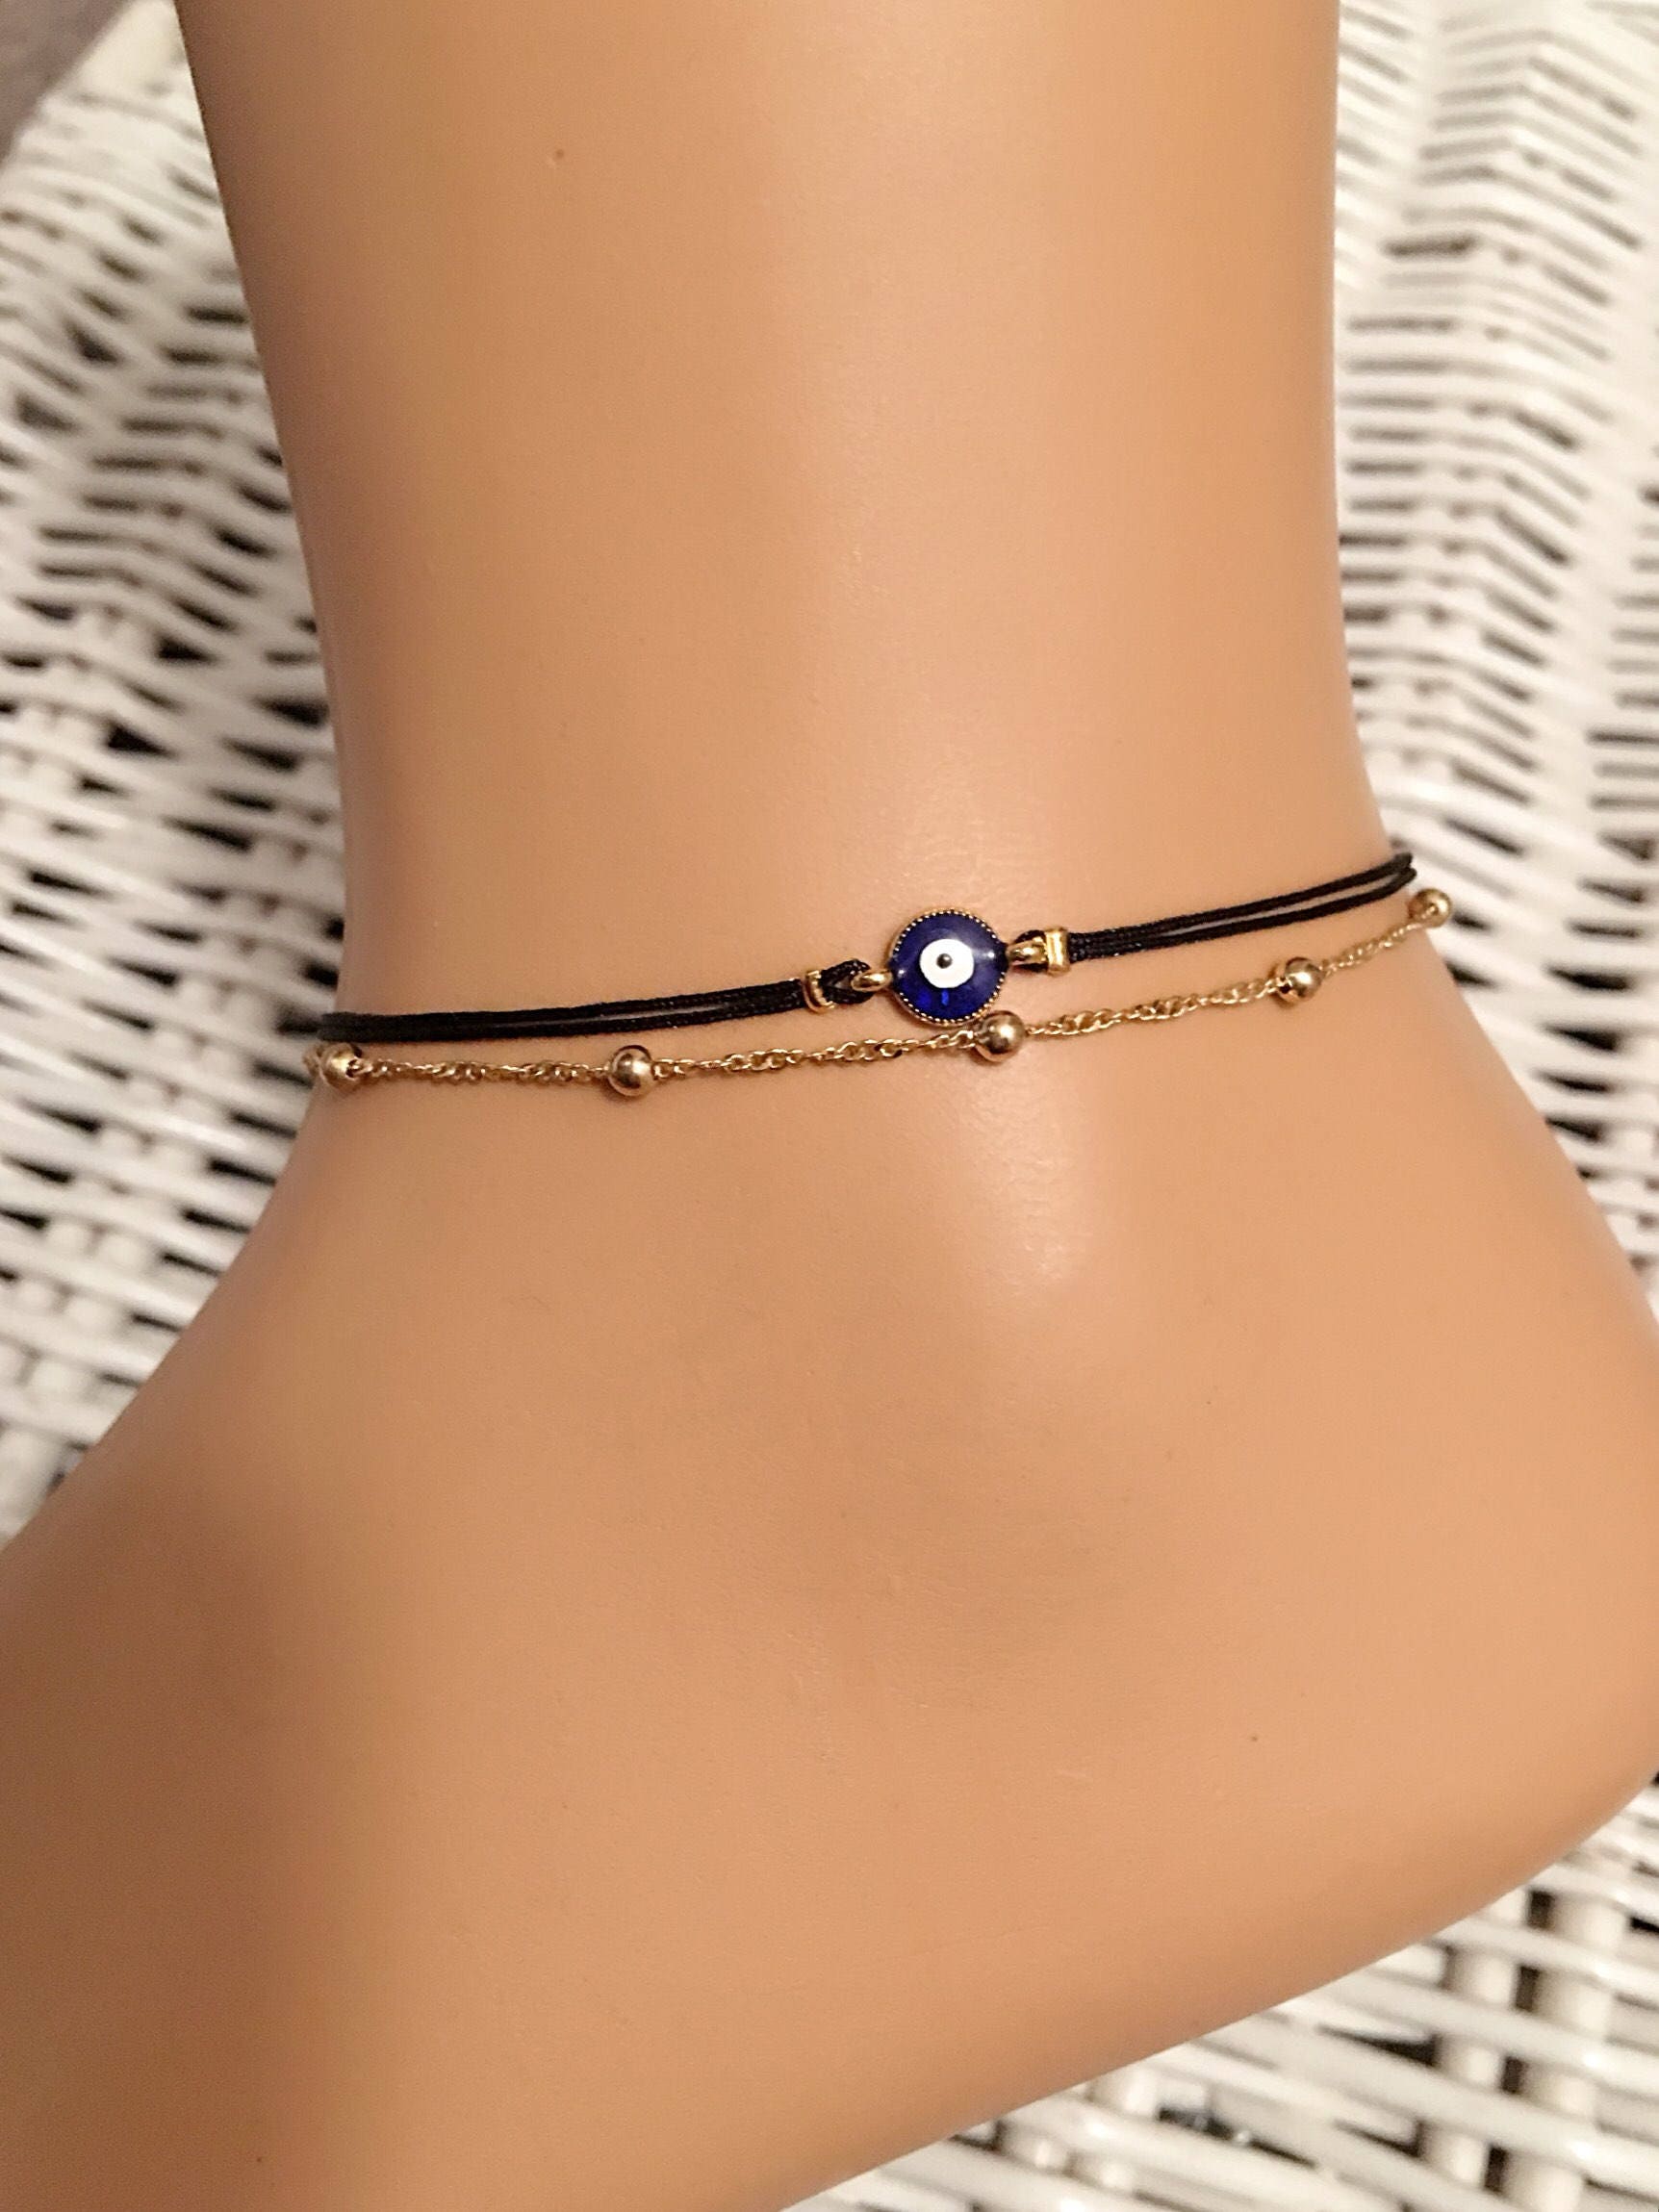 Silver Adjustable Toe Rings jewelry Anklet and Toe Ring Anklet and Bracelet Evil eye jewelry Men's Evil eye anklet bracelet Womens